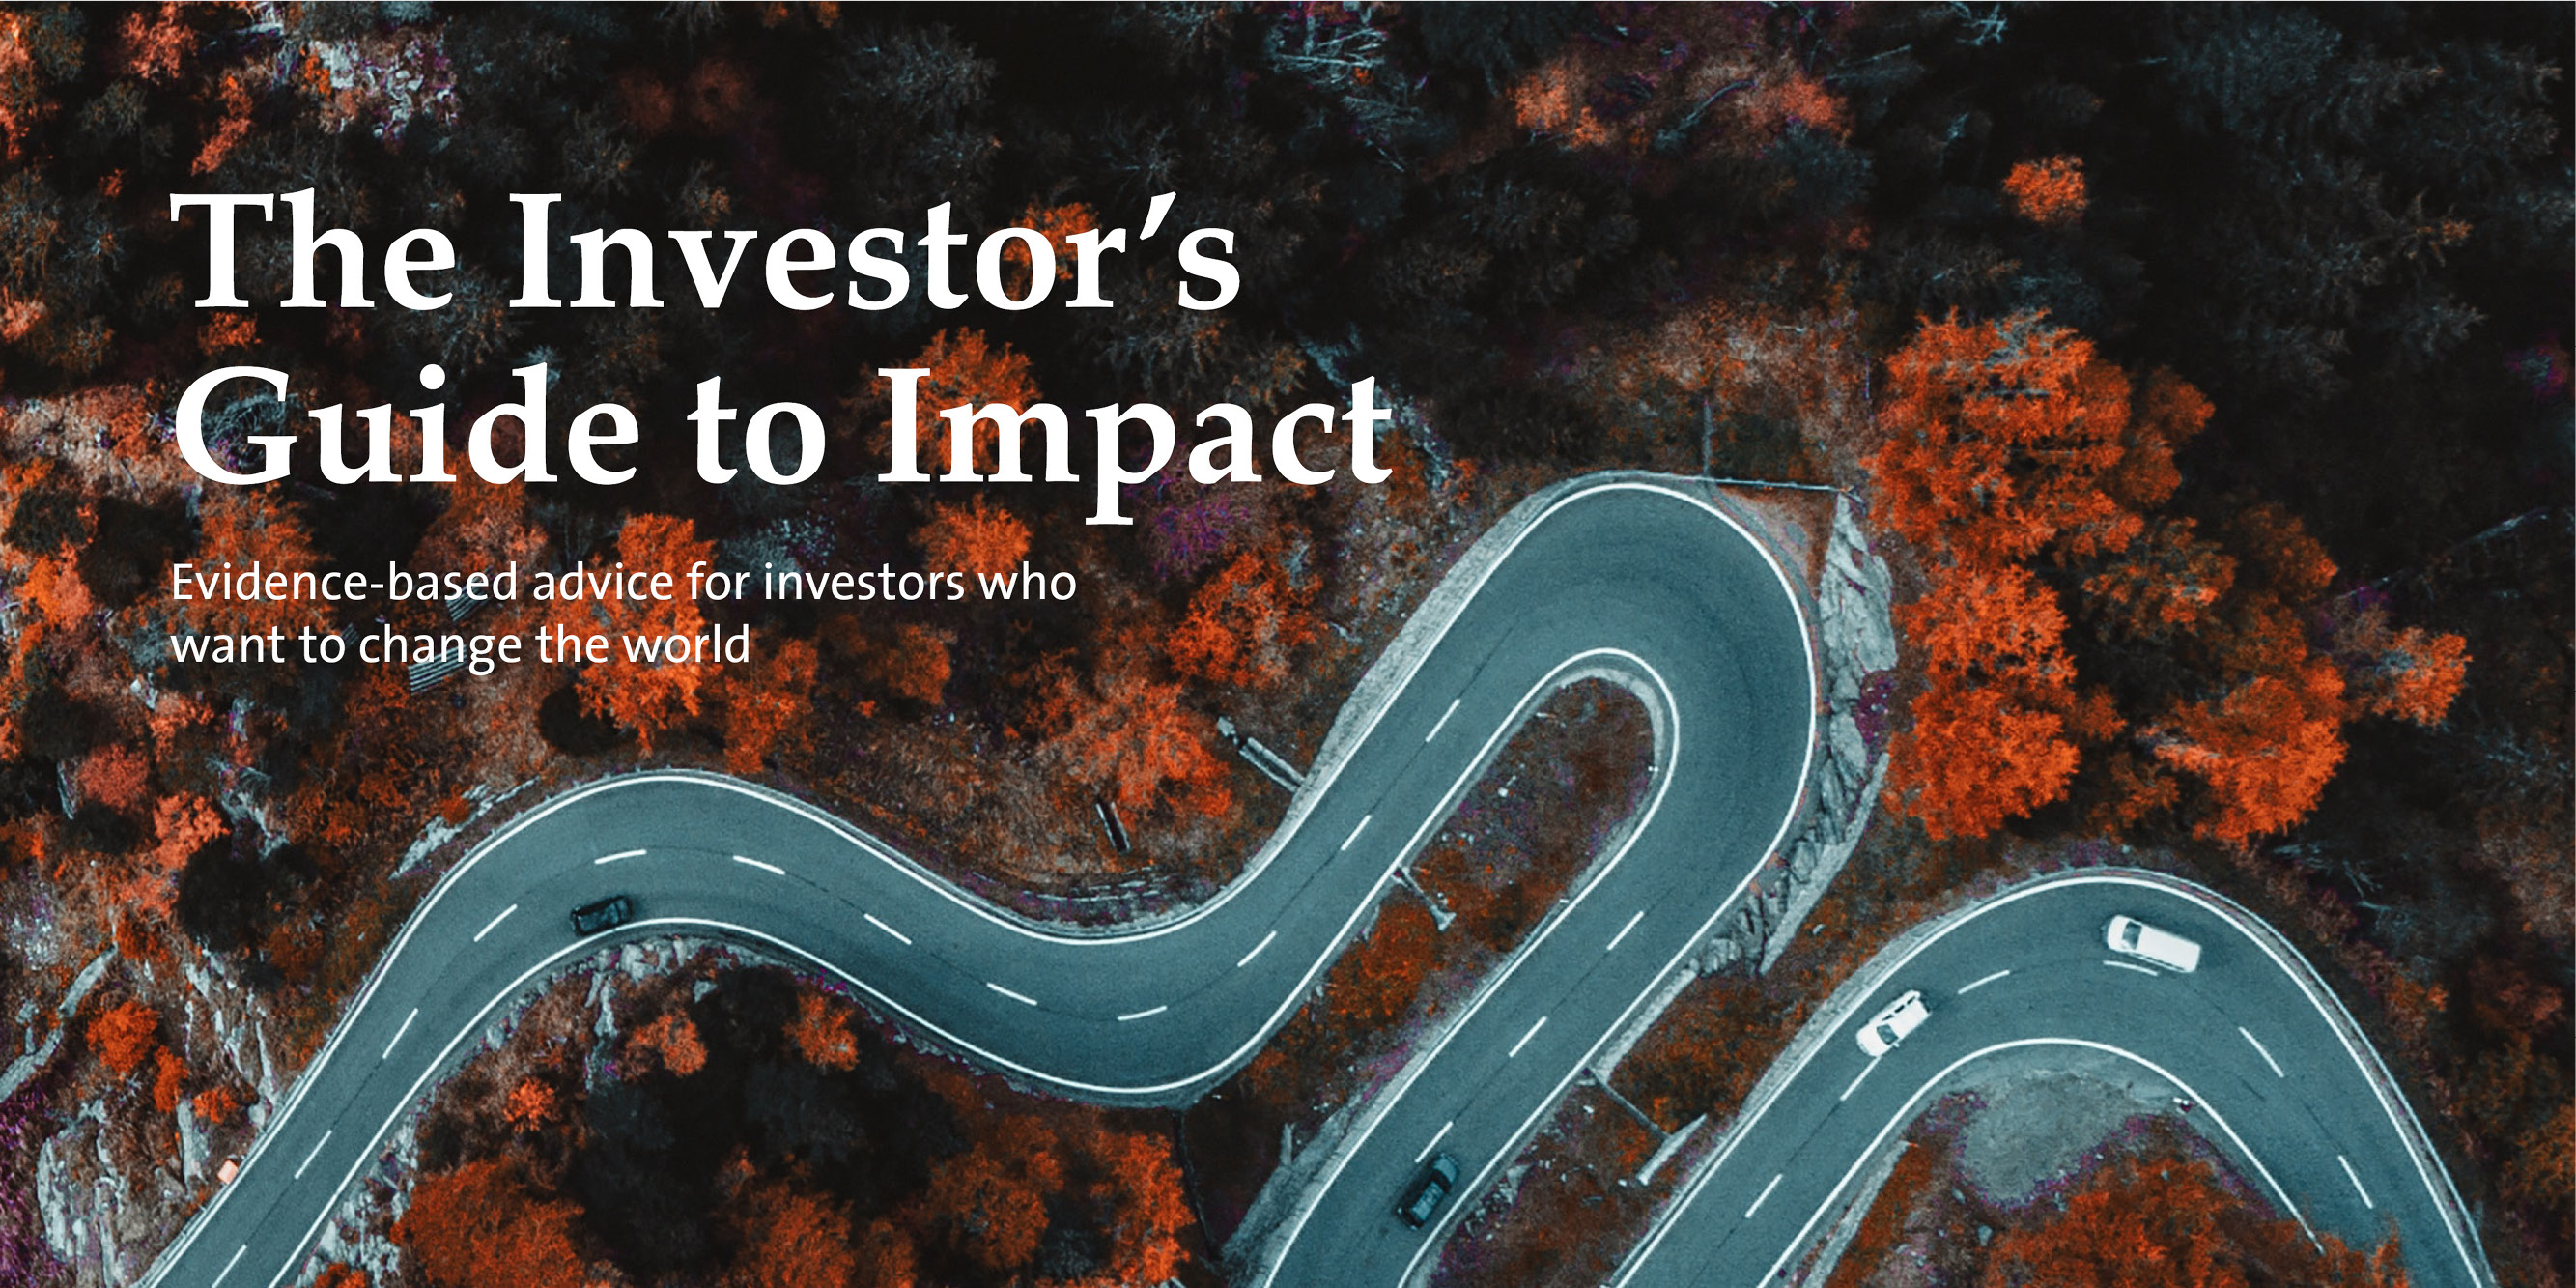 The Investor's Guide to Impact